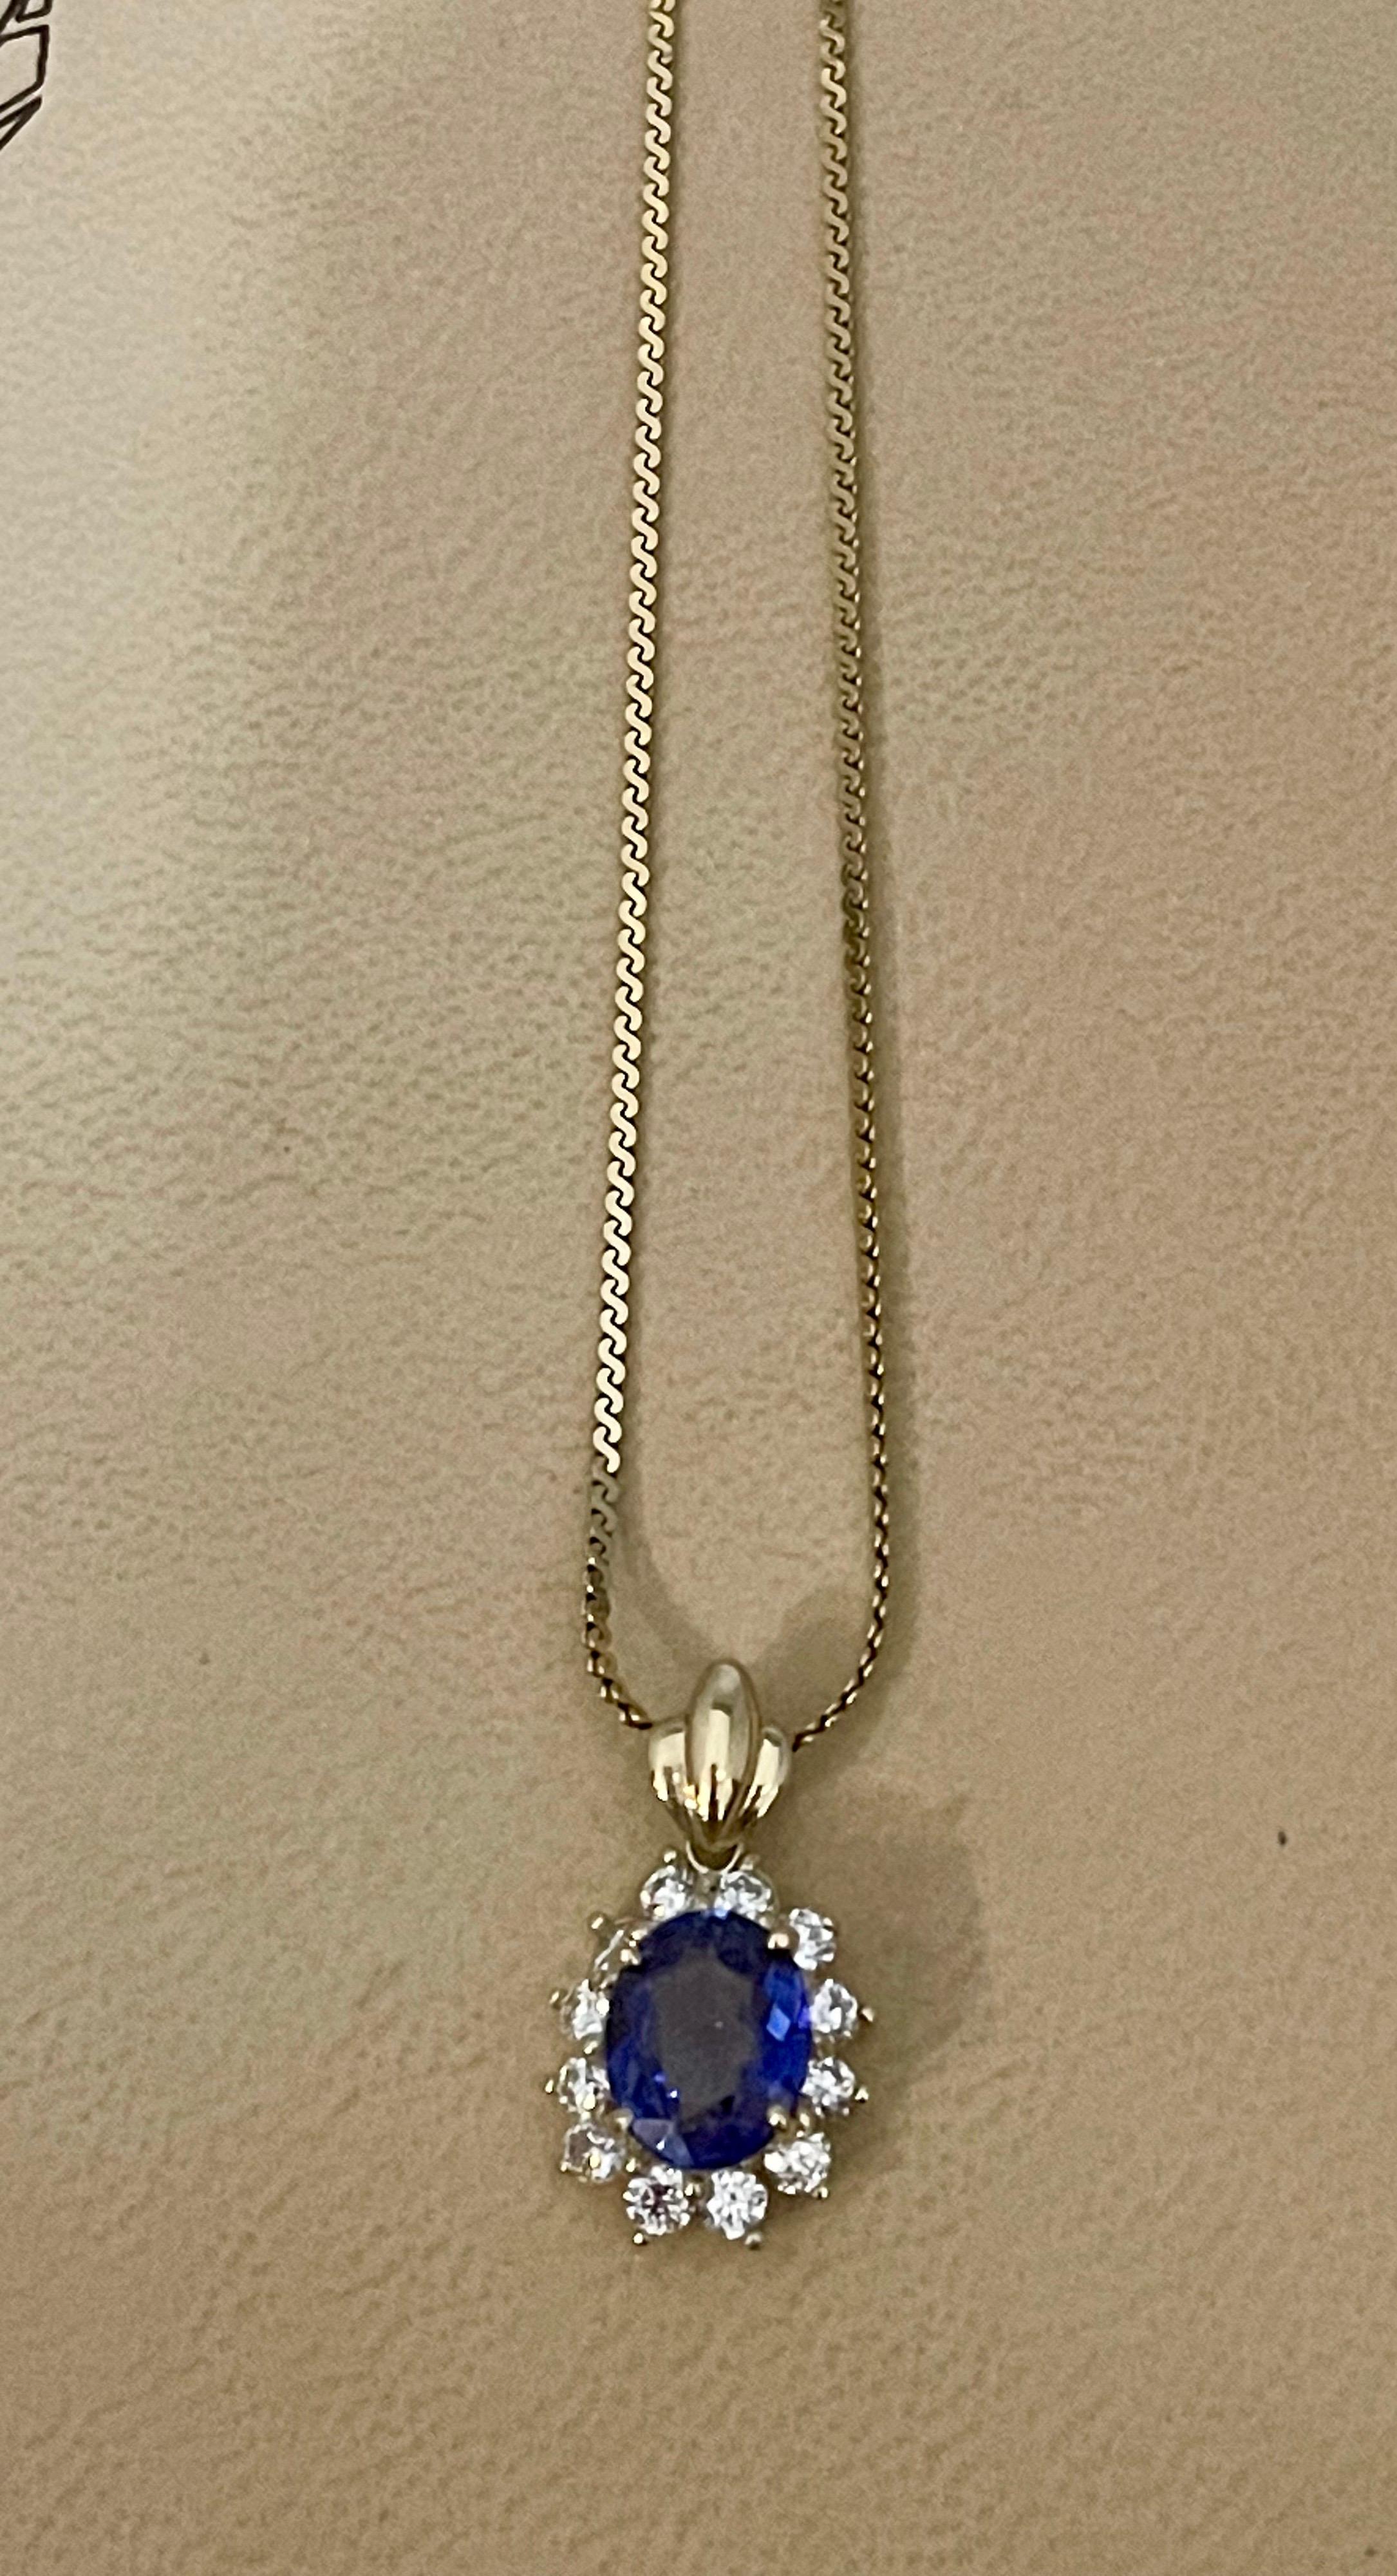 3 Carat Tanzanite and 1 Ct Diamond Pendant or Necklace 14 Karat Yellow Gold For Sale 2